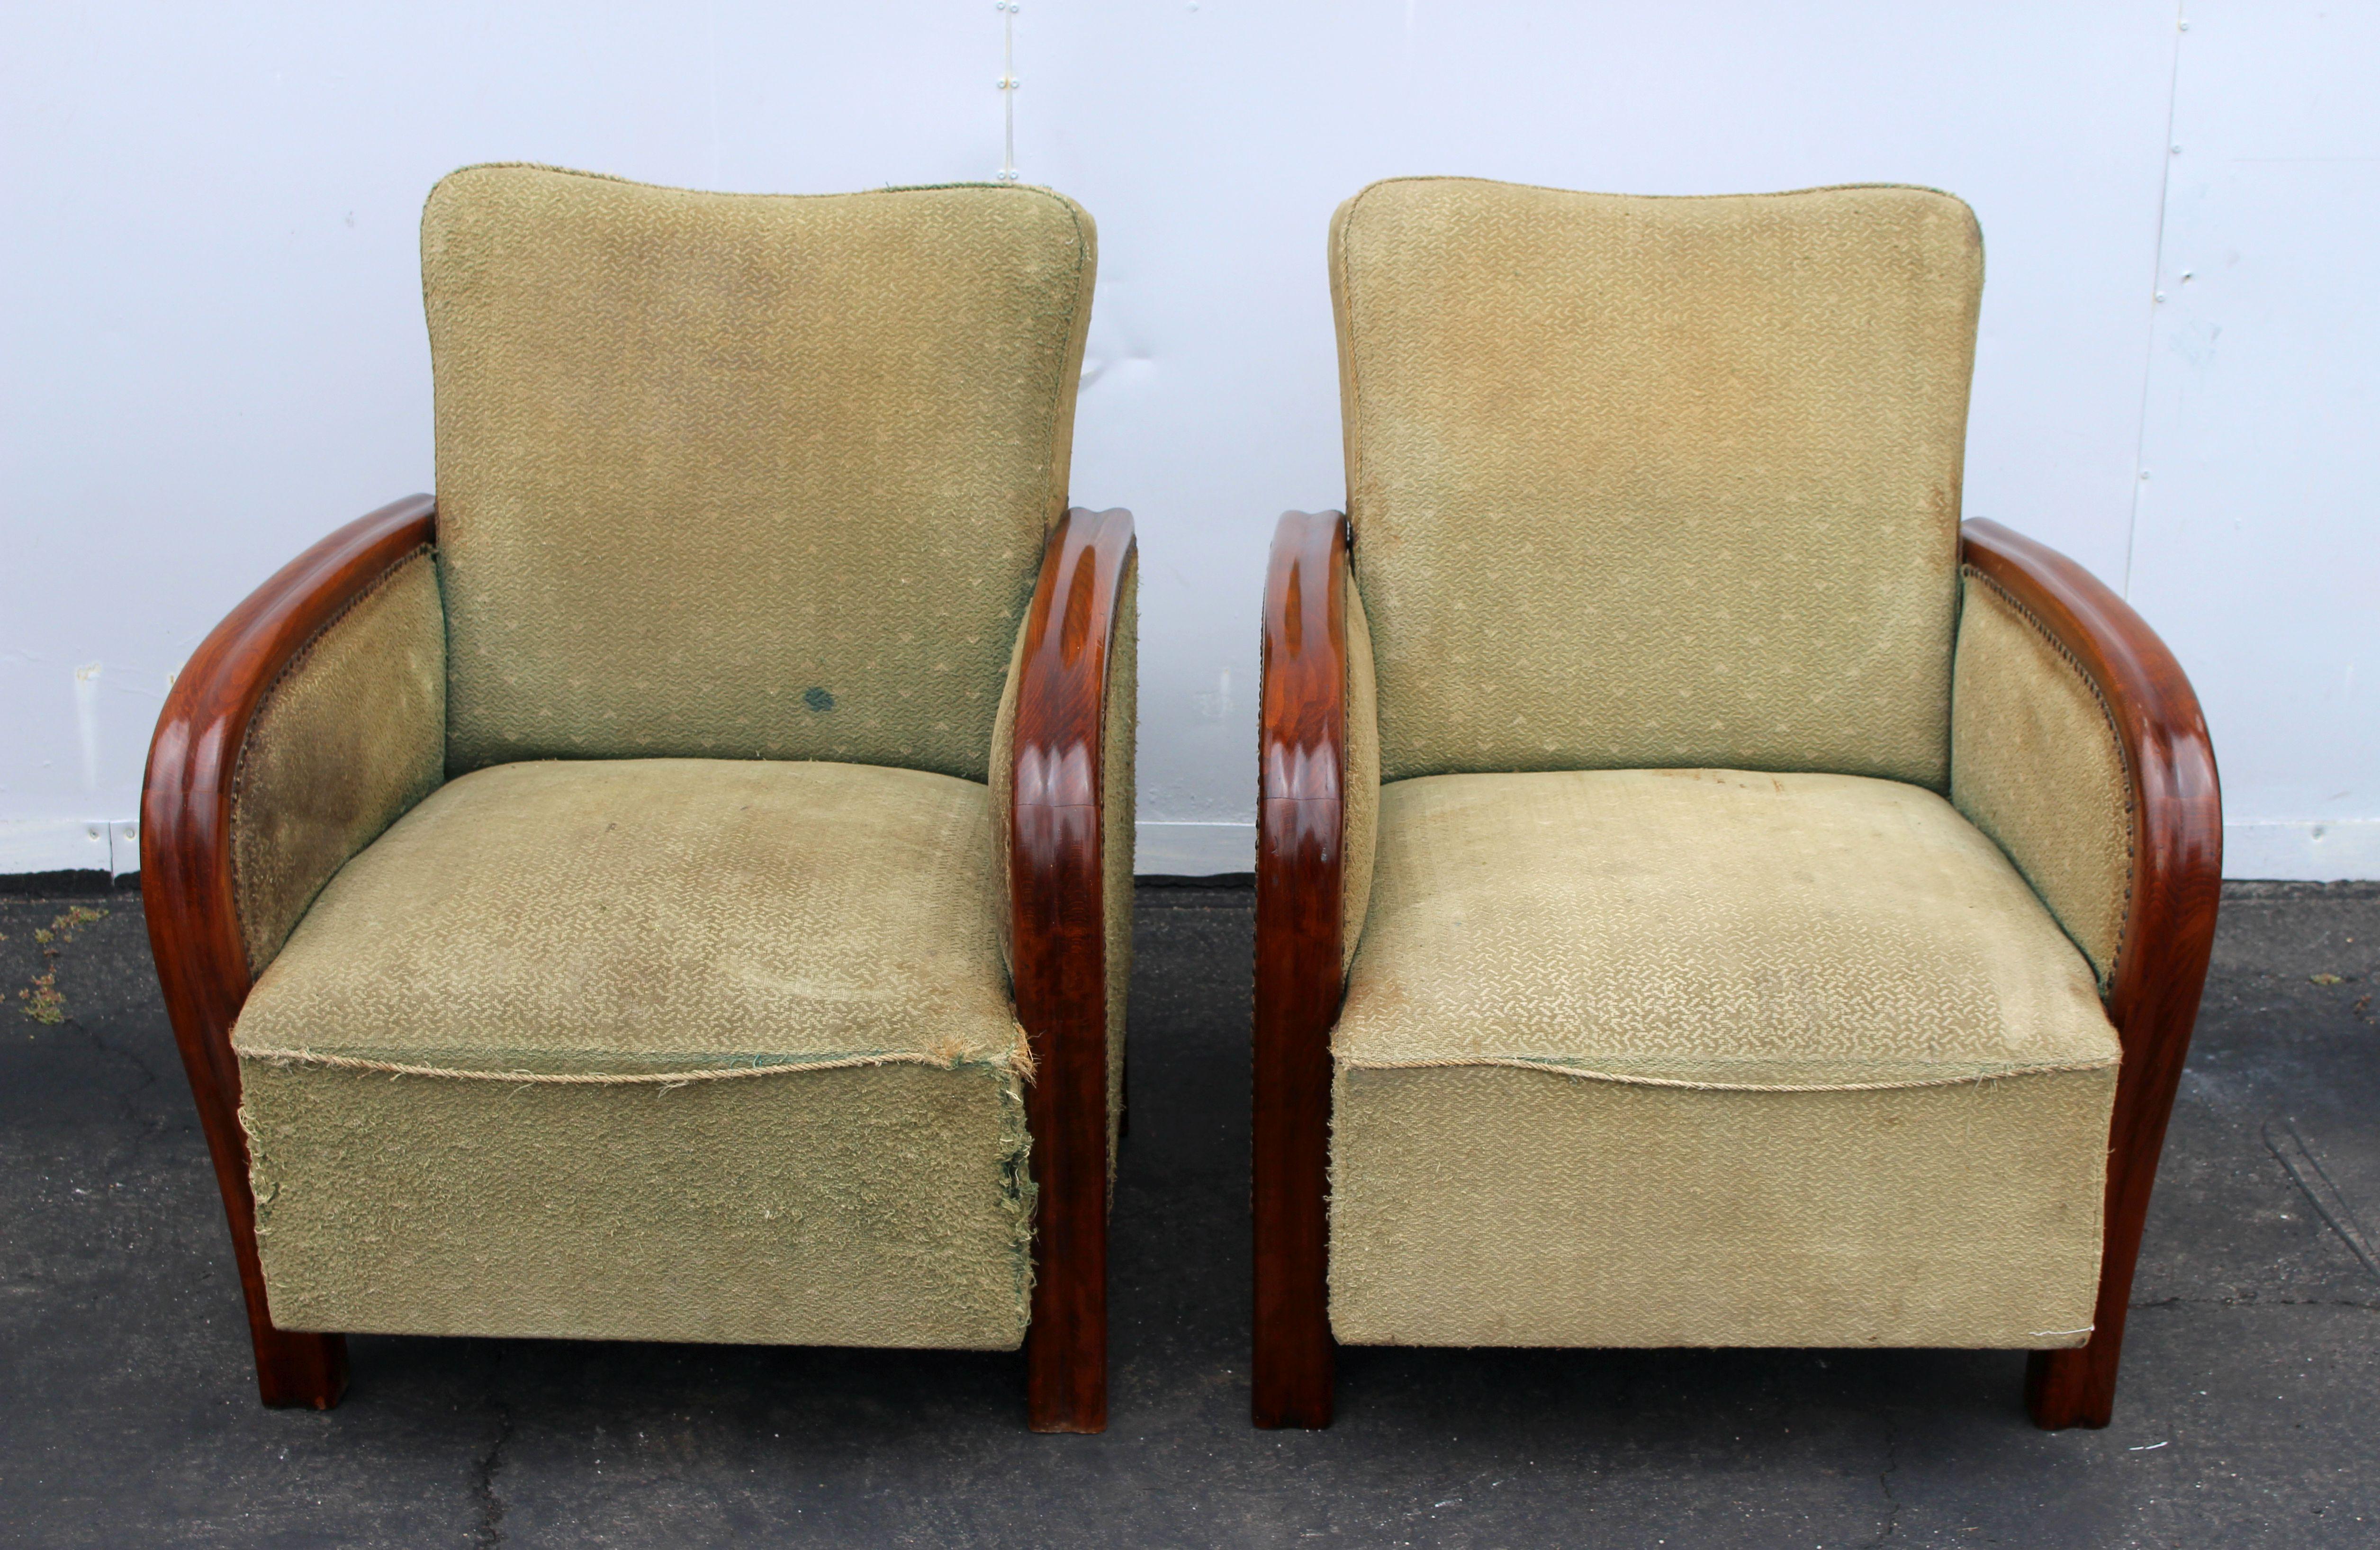 1930s club chairs, original walnut frame base, chairs need a upholstery structurally very good .Wood frame shellacked and as shown on the photos near to the excellent condition.